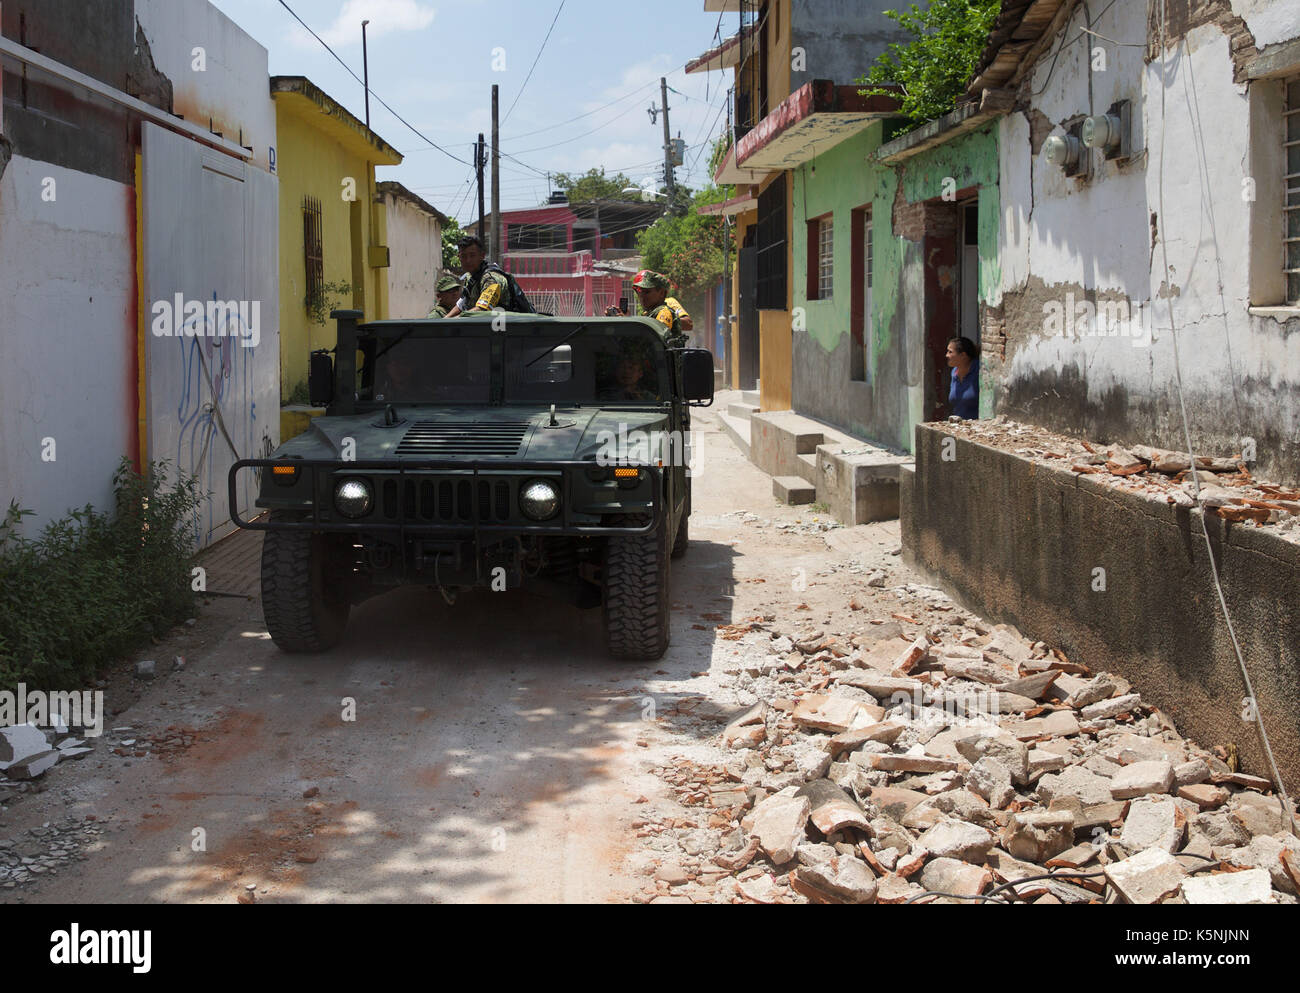 Juchitan, Mexico. 9th September, 2017. A military vehicle inspects a street after an earthquake hit in Juchitan, Oaxaca state, Mexico, Sept. 9, 2017. A powerful earthquake measuring 8.2 on the Richter scale struck off Mexico's southern coast late Thursday night, killing 90 people. Credit: Xinhua/Alamy Live News Stock Photo